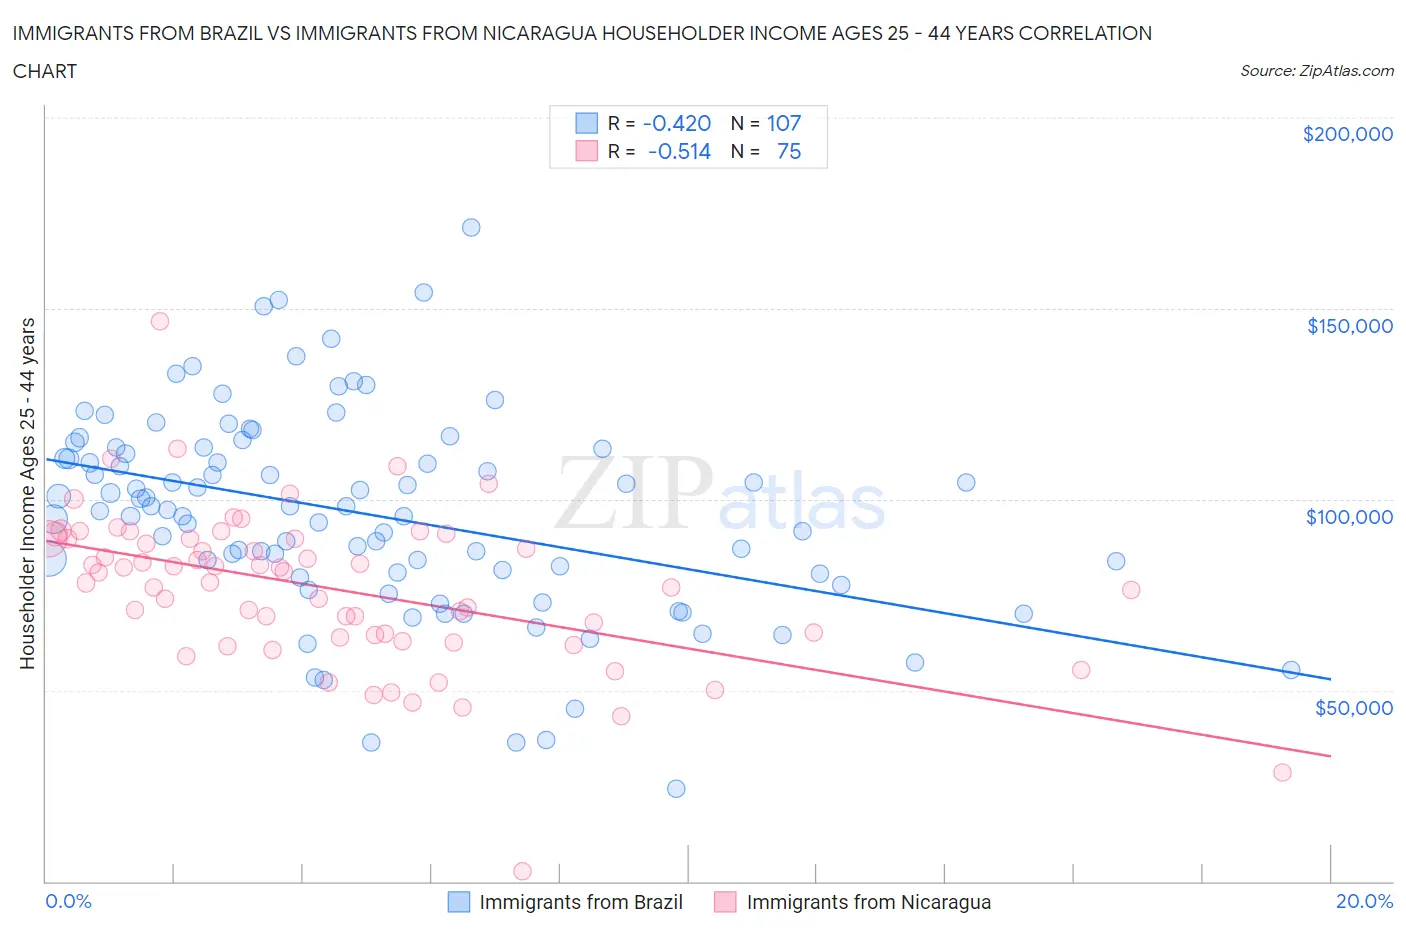 Immigrants from Brazil vs Immigrants from Nicaragua Householder Income Ages 25 - 44 years